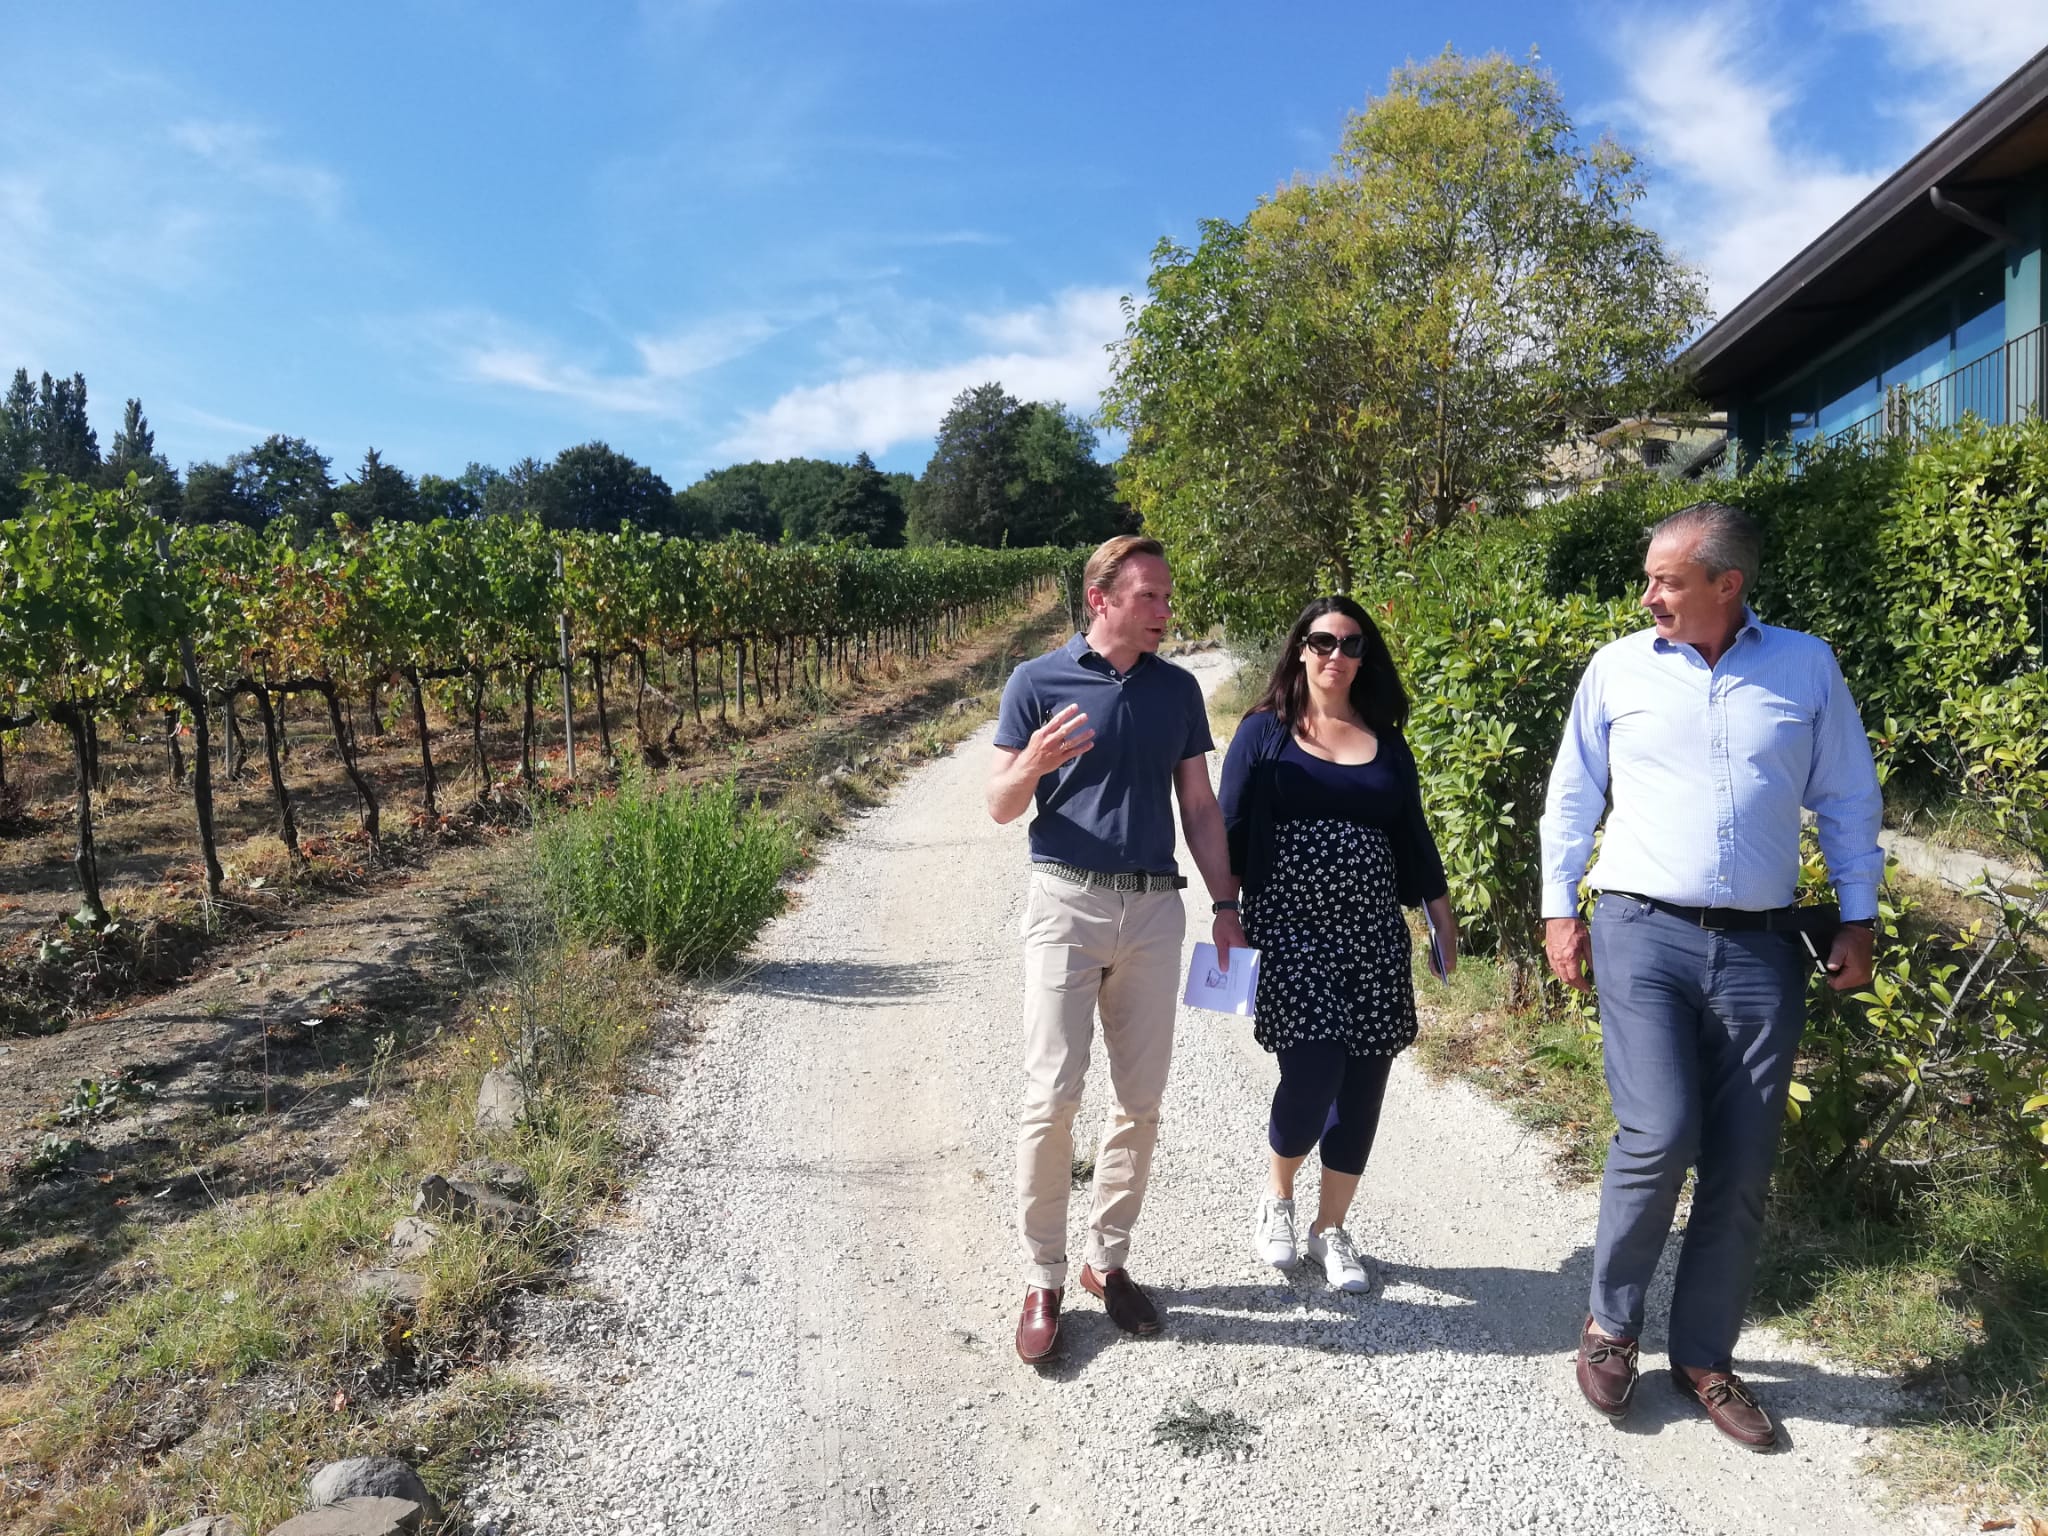 In Orvieto: Masterclass Impression – 3 people have a walking meeting